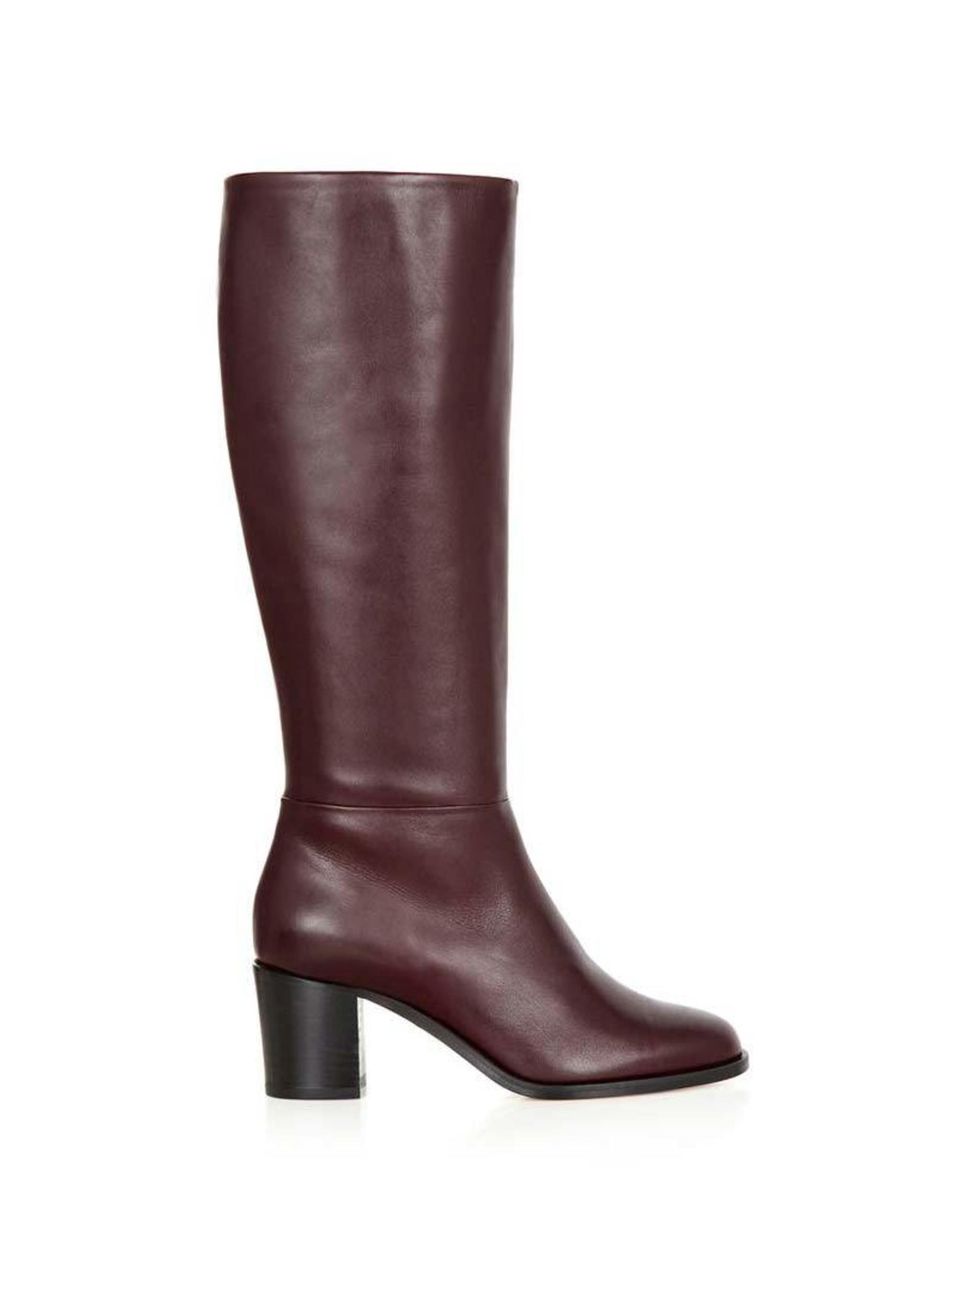 <p>Classic winter boots with a nod to the 70s trend.</p>

<p><a href="http://www.hobbs.co.uk/product/display?productID=0214-O1A8-007H650&productvarid=0214-O1A8-007H650-BURGUNDY%20BROWN-36&refpage=new-arrivals" target="_blank">Hobbs</a> boots, £259</p>